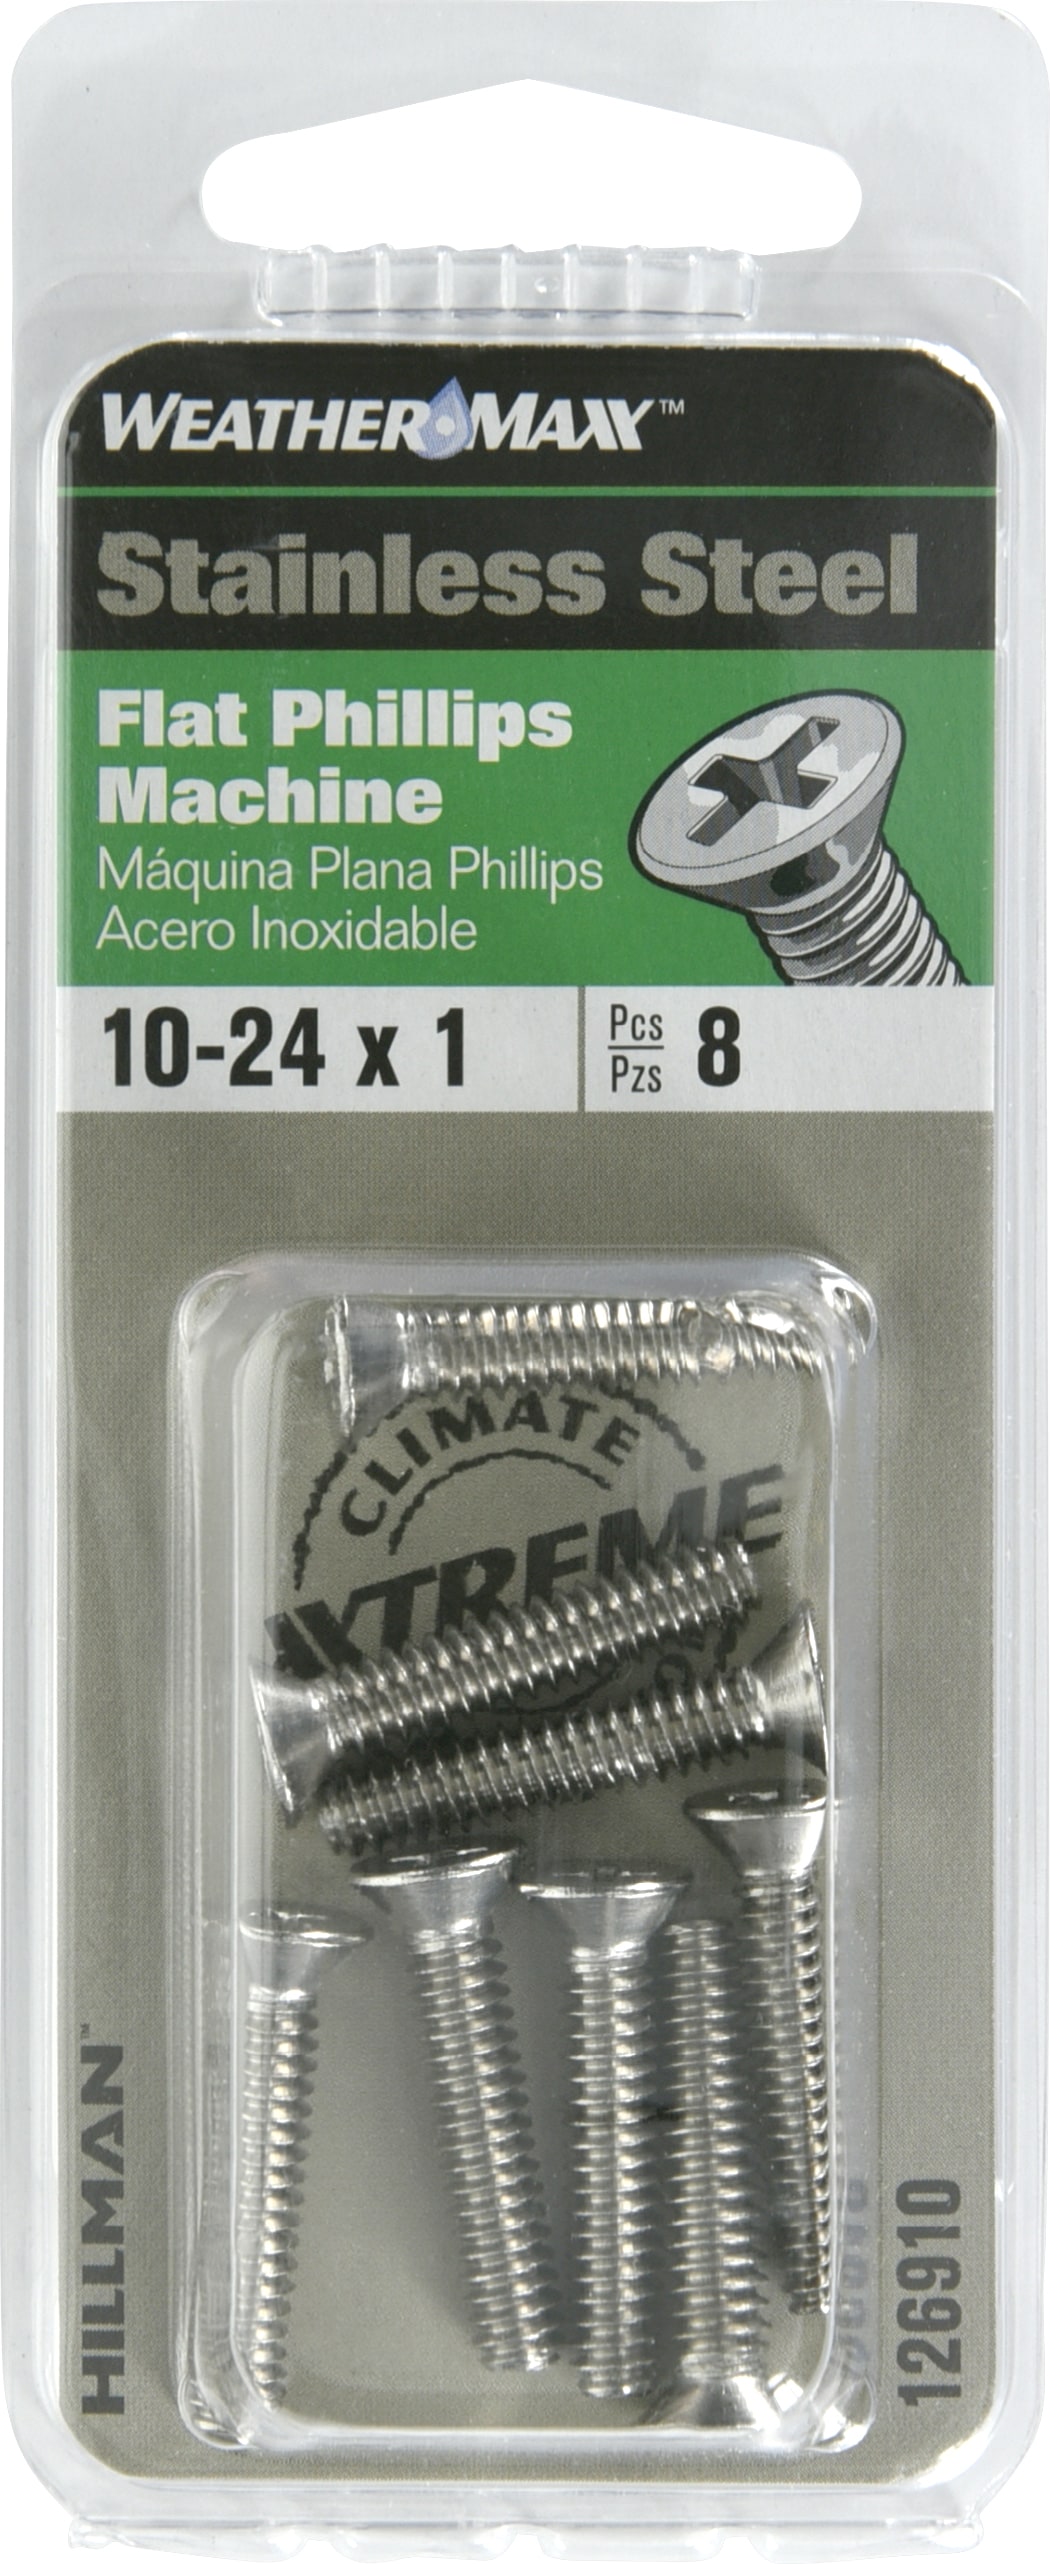 100 X Small Stainless Steel Screw Eye Pins / Bails 10mm X 4mm 